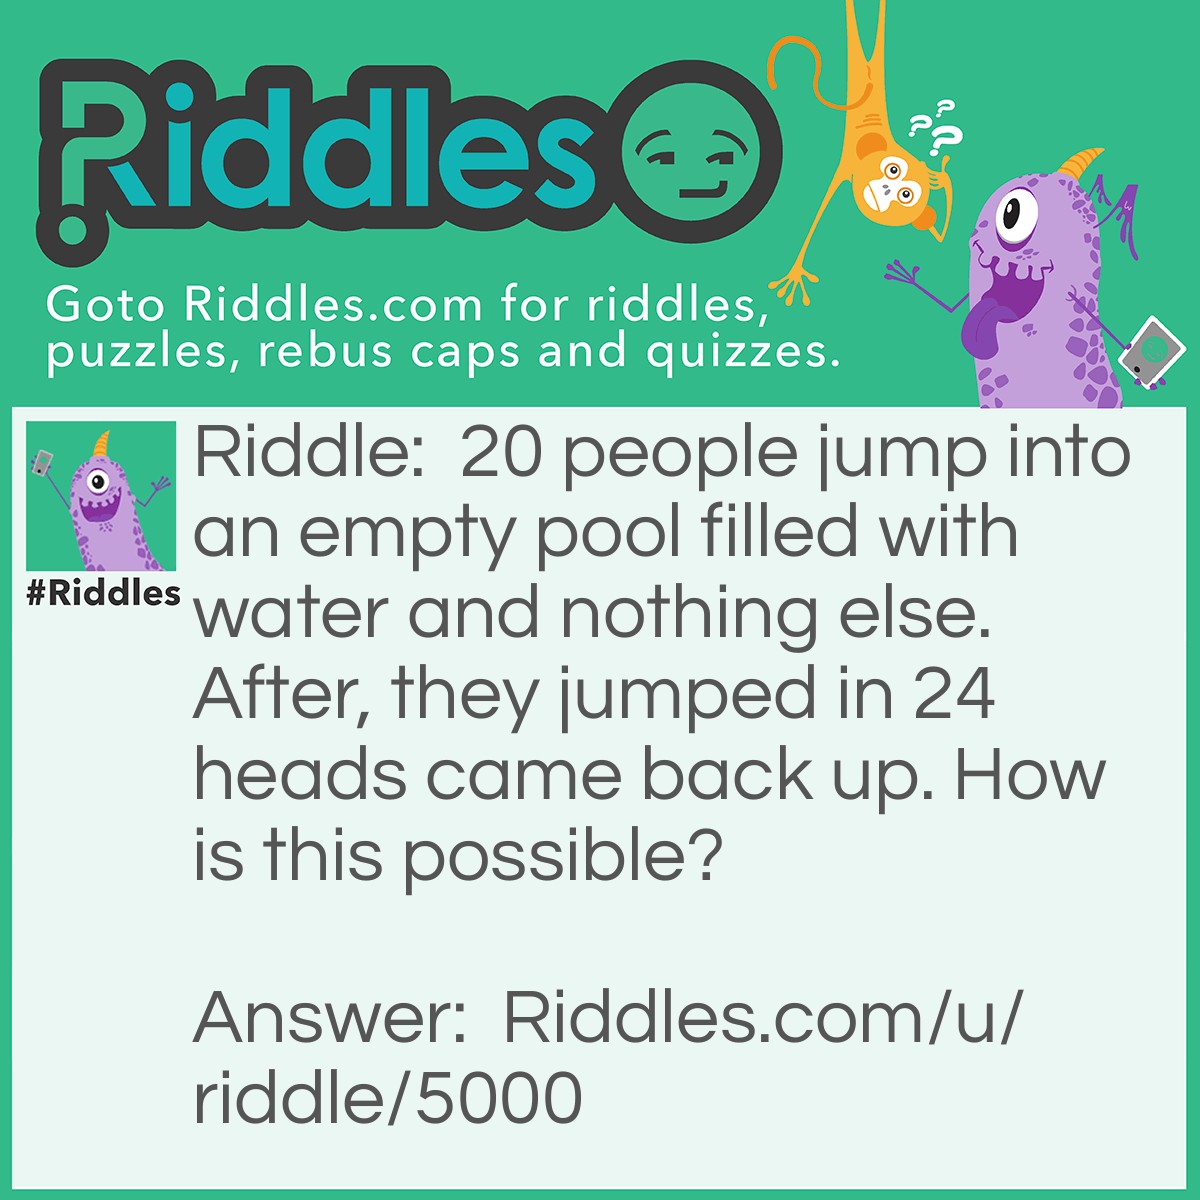 Riddle: 20 people jump into an empty pool filled with water and nothing else. After, they jumped in 24 heads came back up. How is this possible? Answer: There was 20 foreheads.